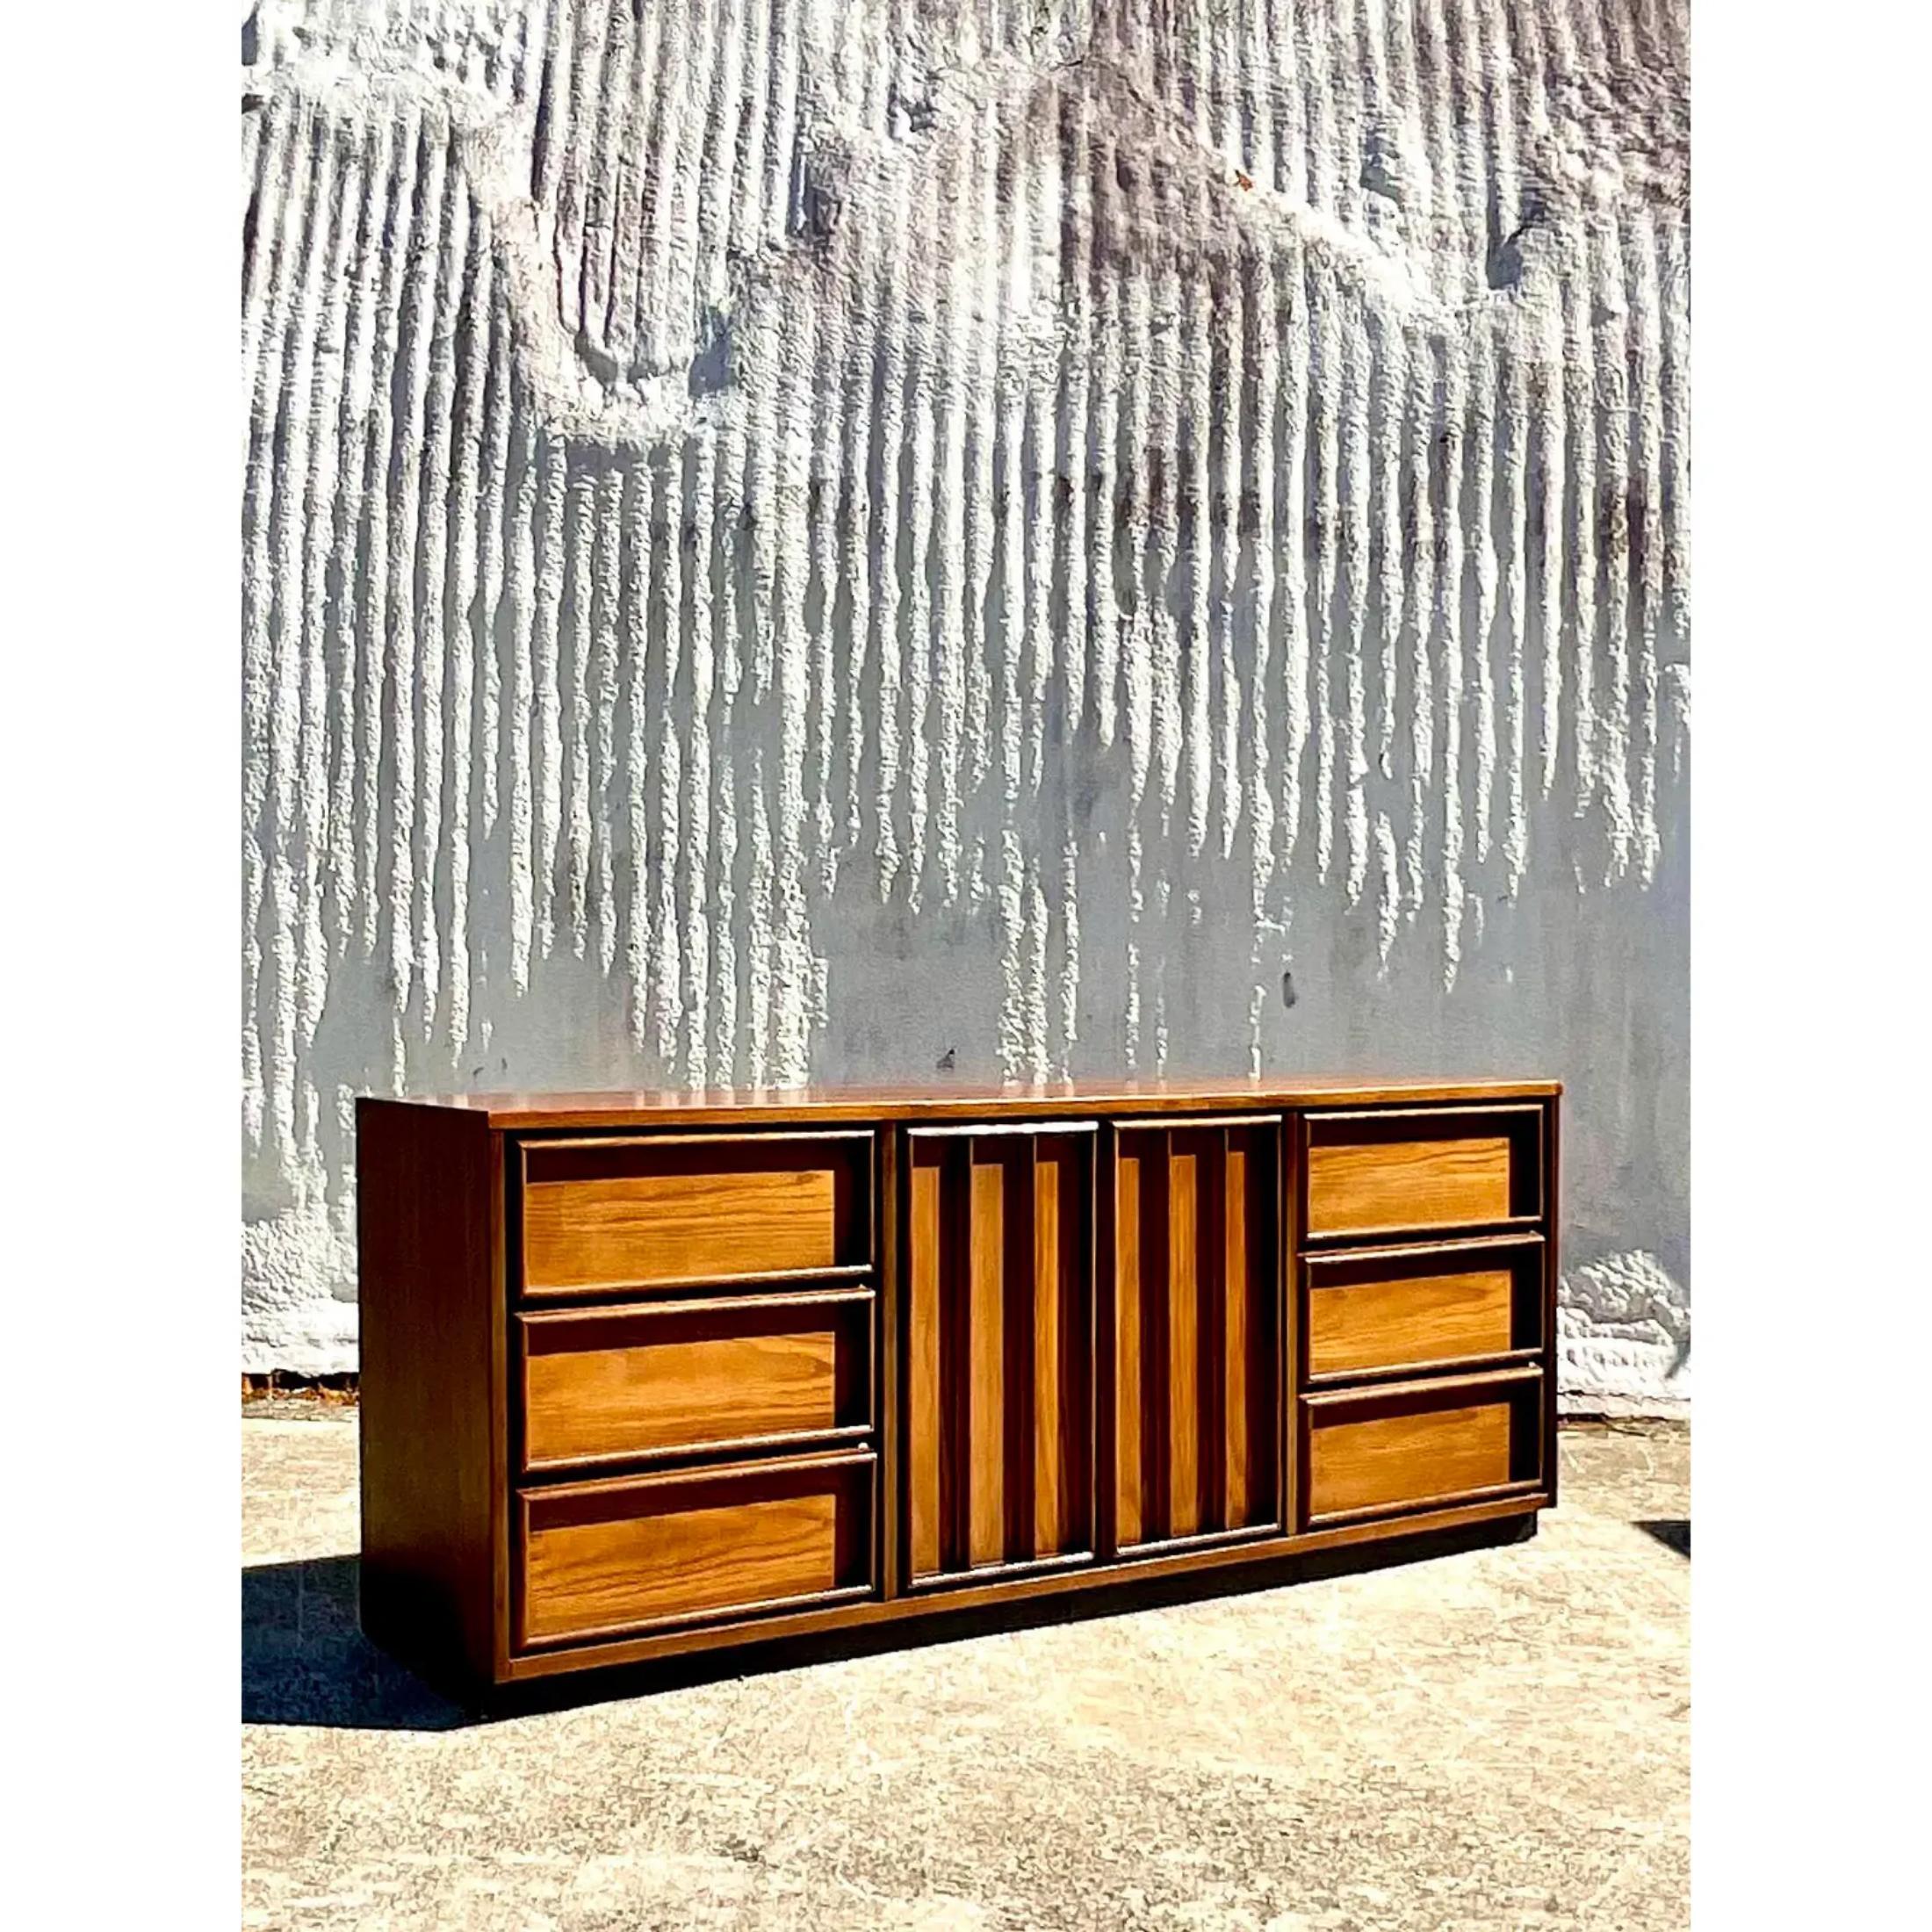 Outstanding MidCentury Bassett 9 drawer dresser. A chic combination of walnut and oak. Two doors open to reveal three additional drawers. Marked inside the top drawer. Acquired from a Palm Beach estate